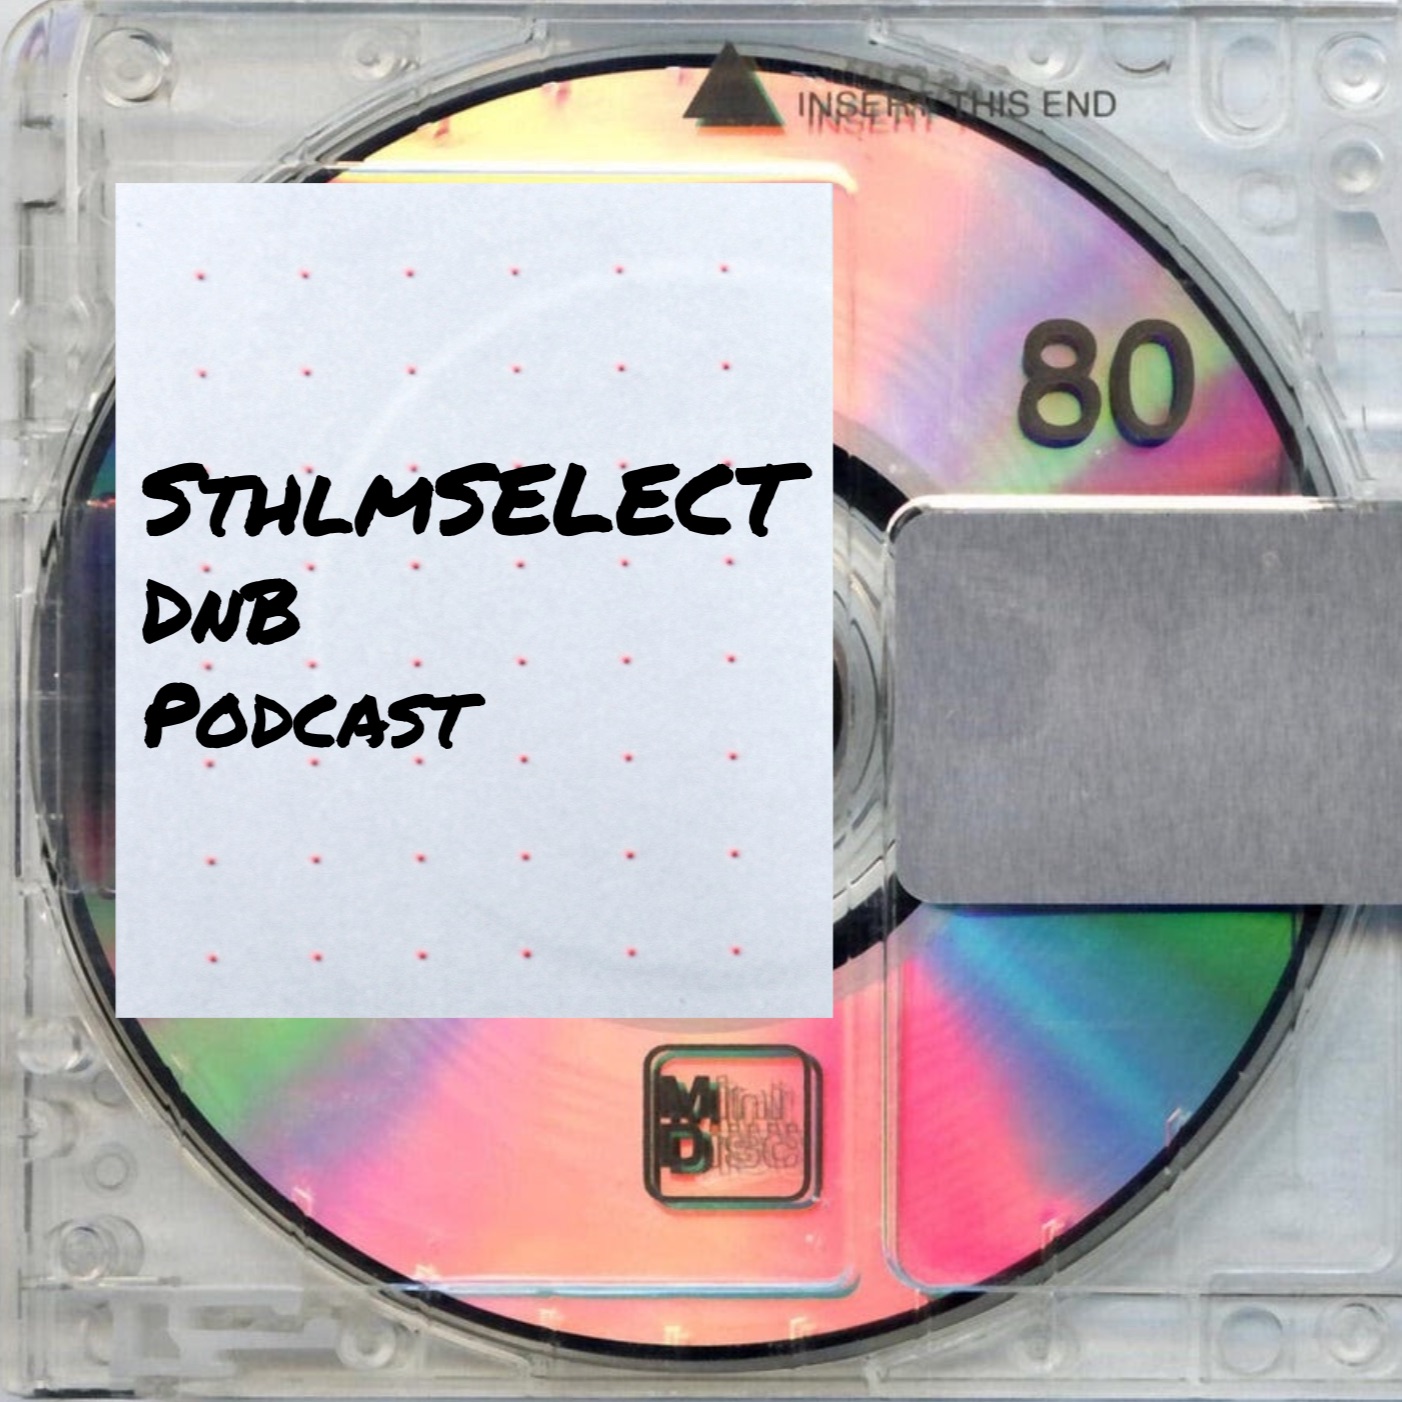 SthlmSELECT DnB Podcast